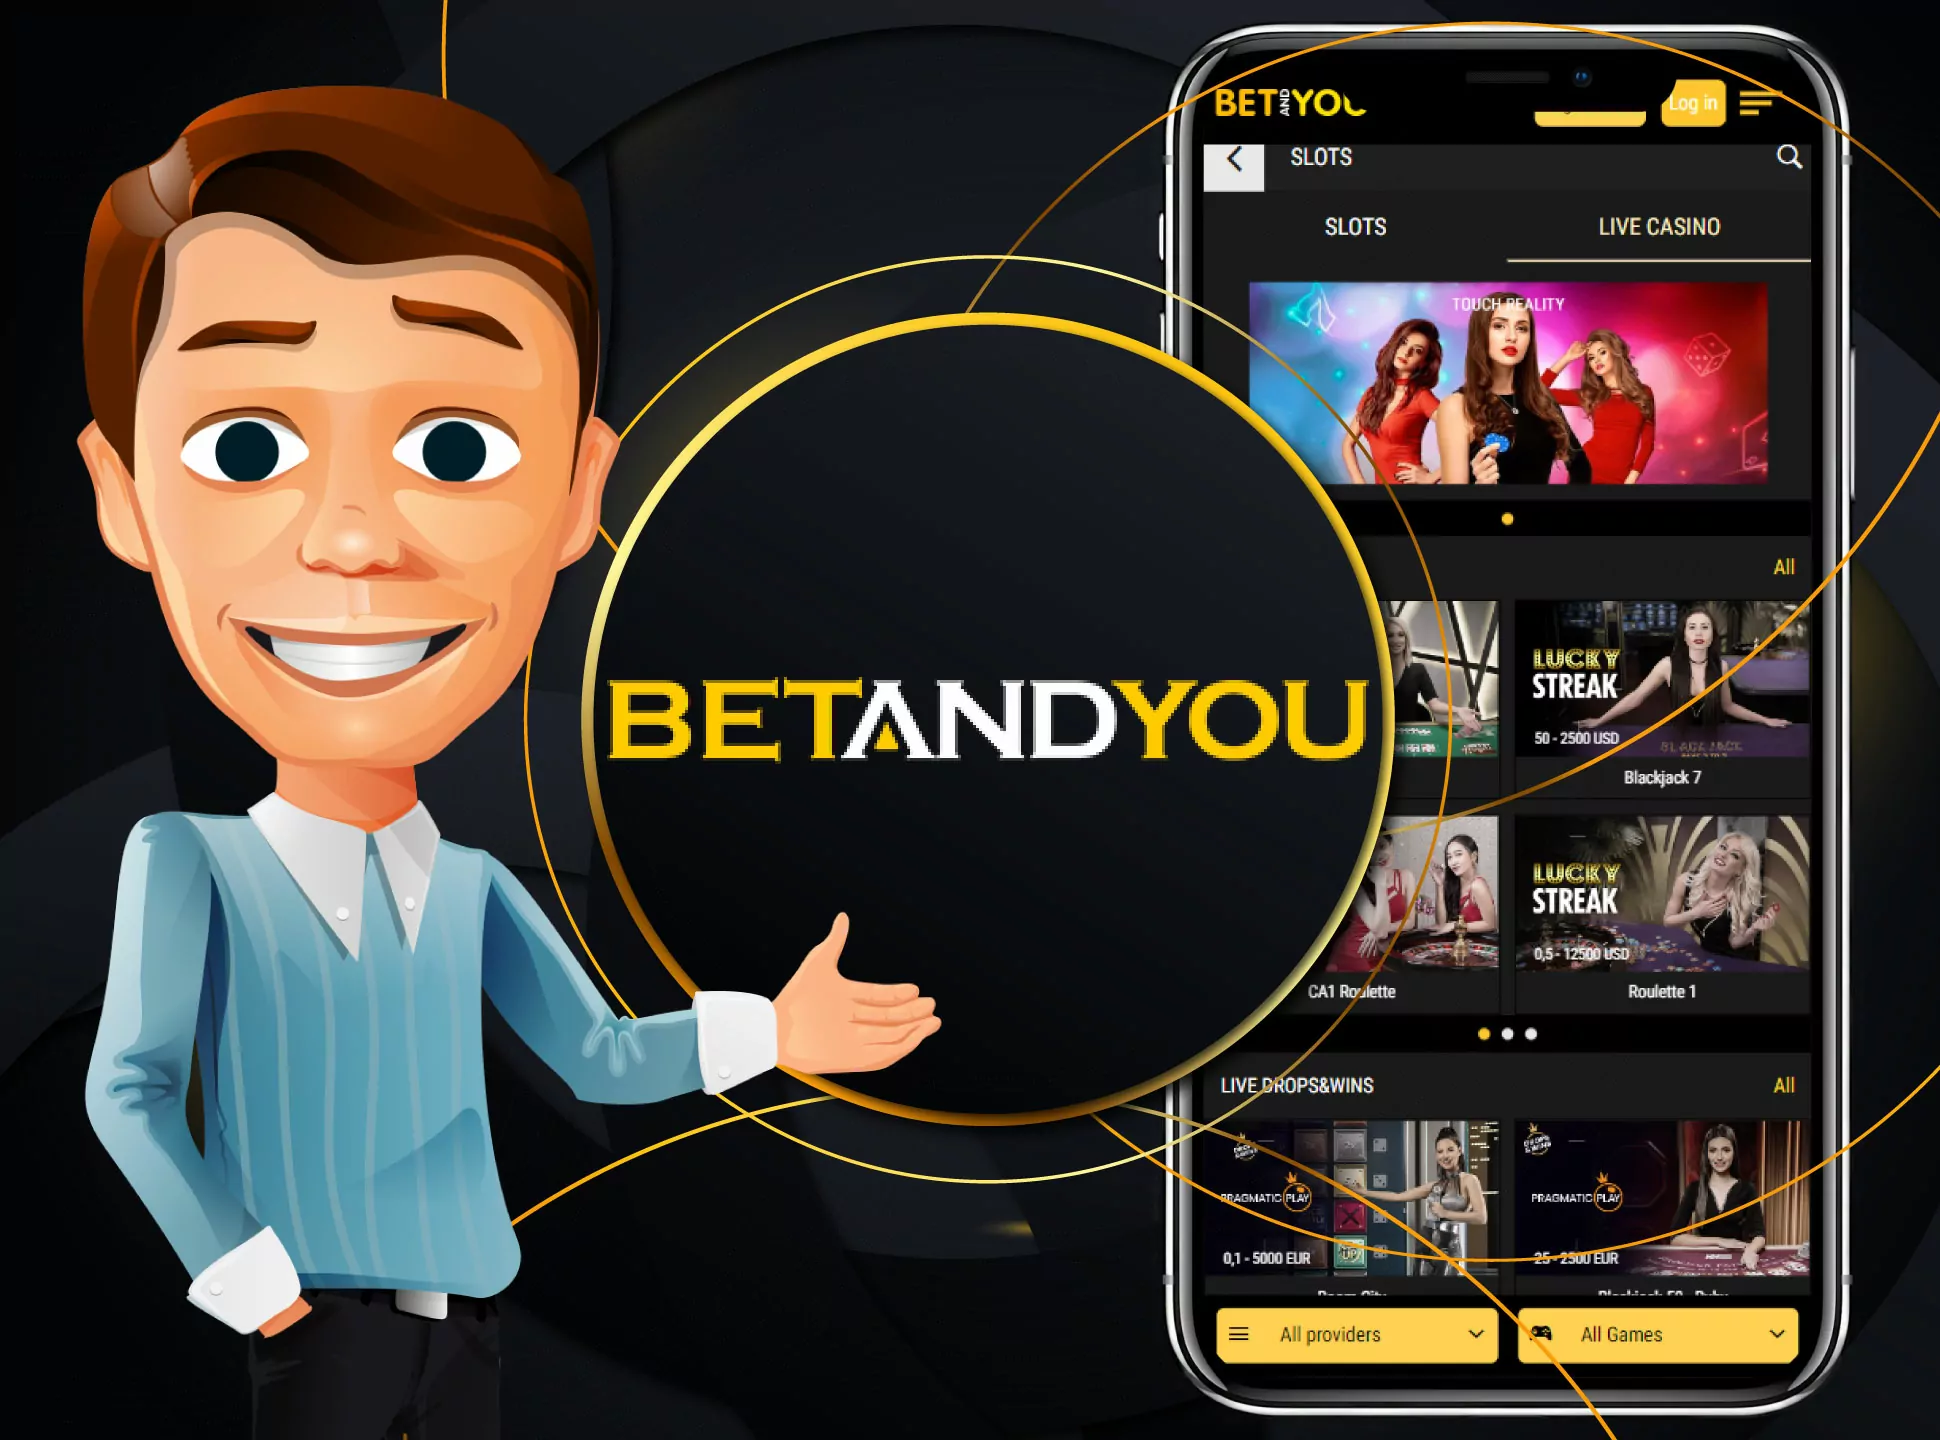 Betandyou is a fairly recognizable casino in Bangladesh and Asia that has a rich range of advantages in the market.